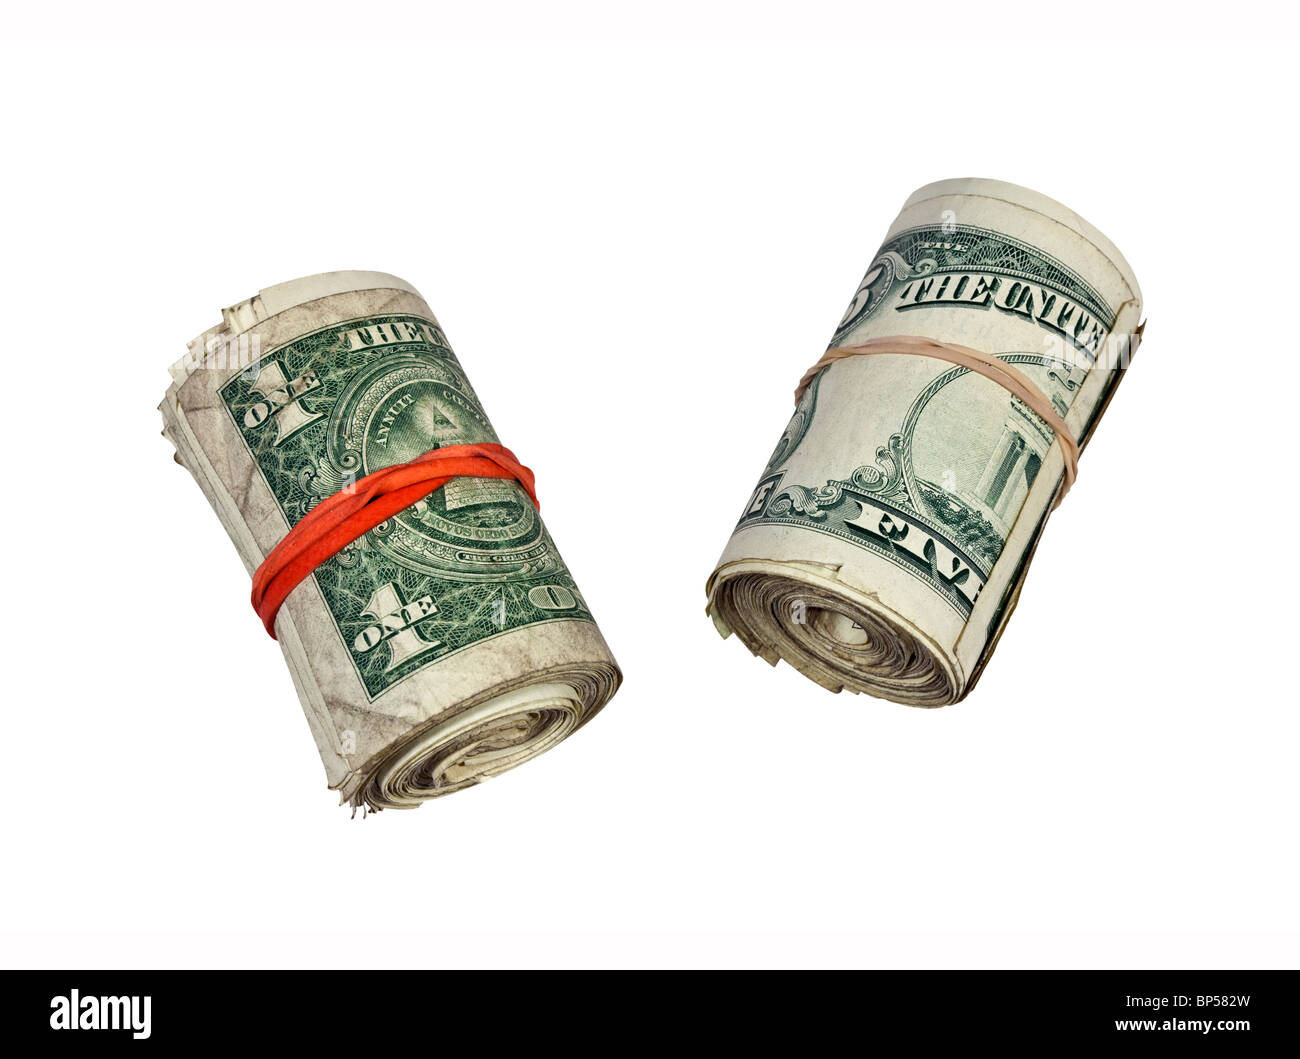 Rolls of dirty street cash. Small bills only please. Stock Photo